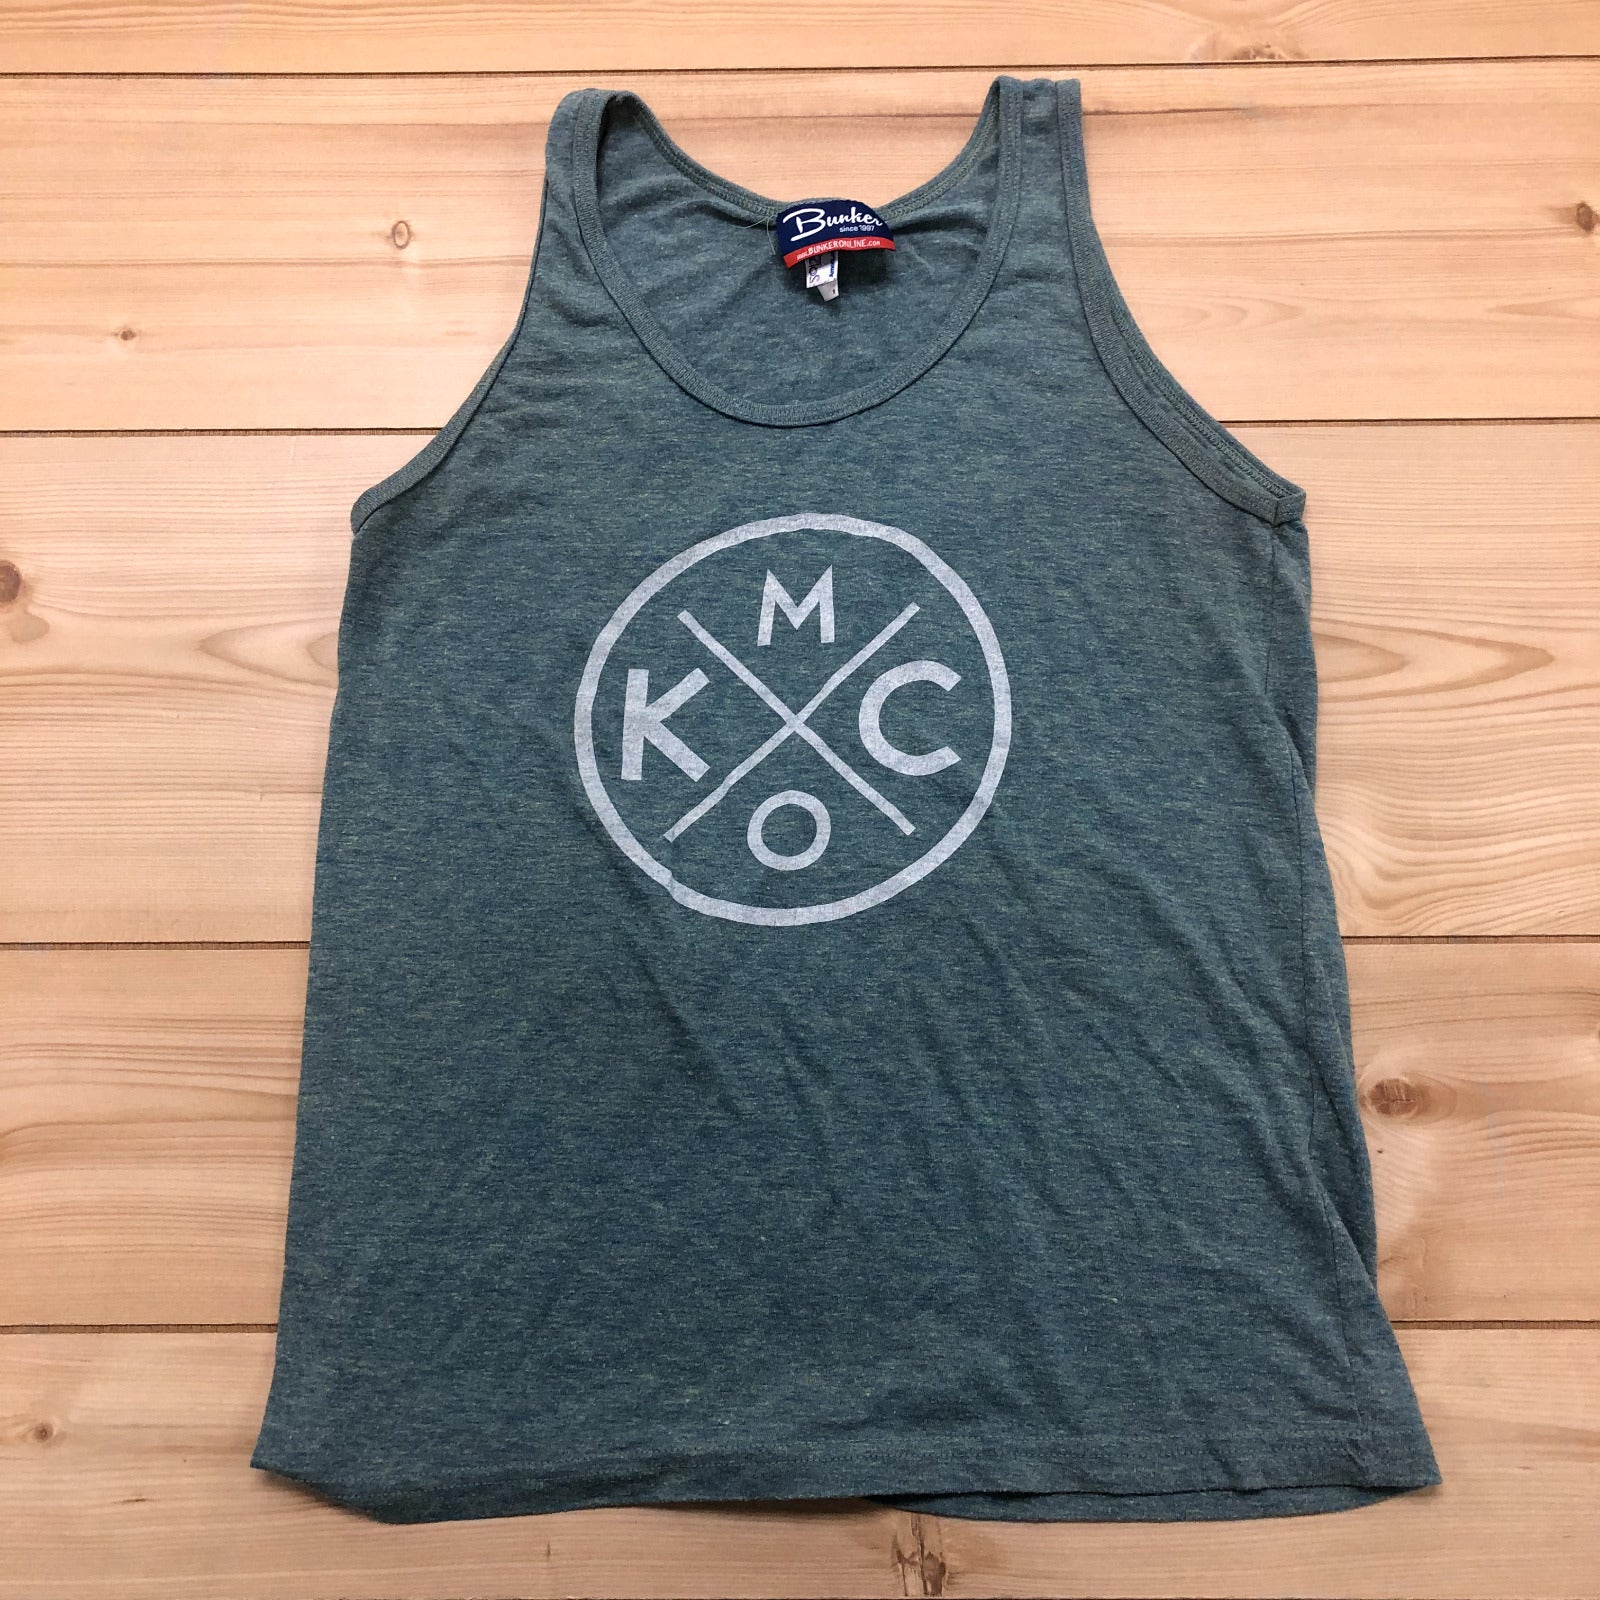 Bunker Green & Blue Heathered KCMO Sleeveless Wide Strap Tank Top Womens Size S